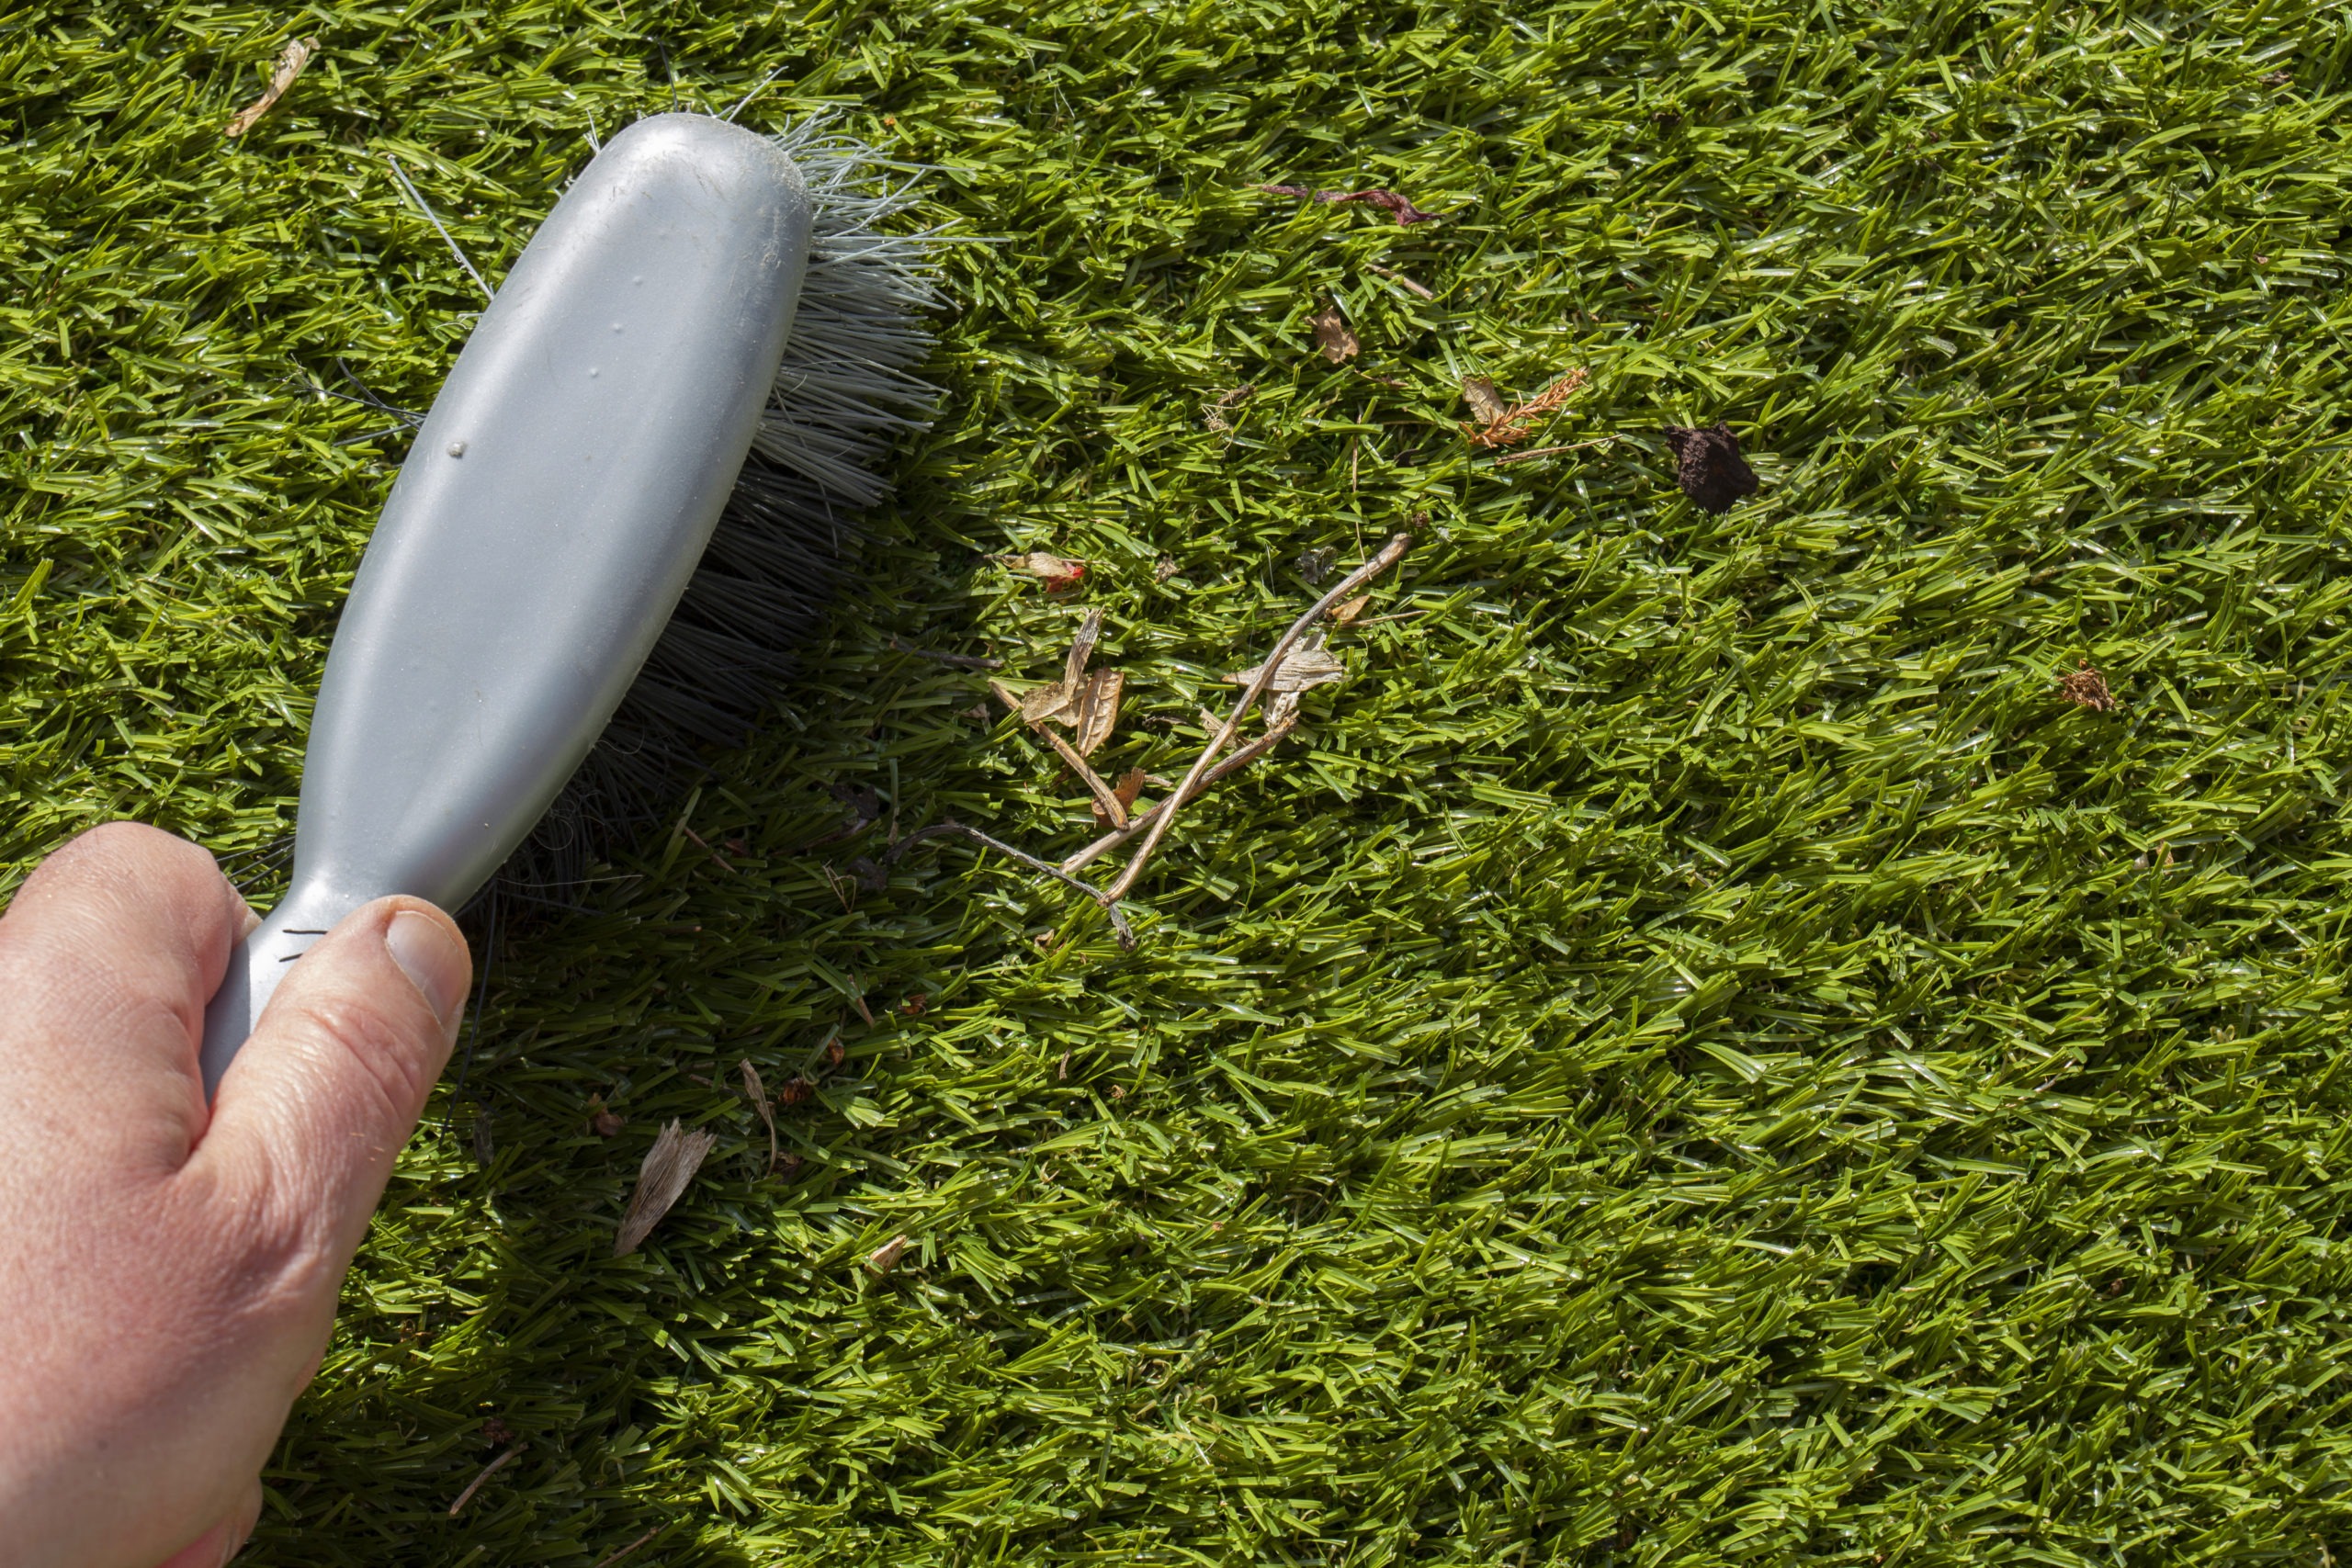 Man brushing rubbish on artifiicial grass turf with a hand brush